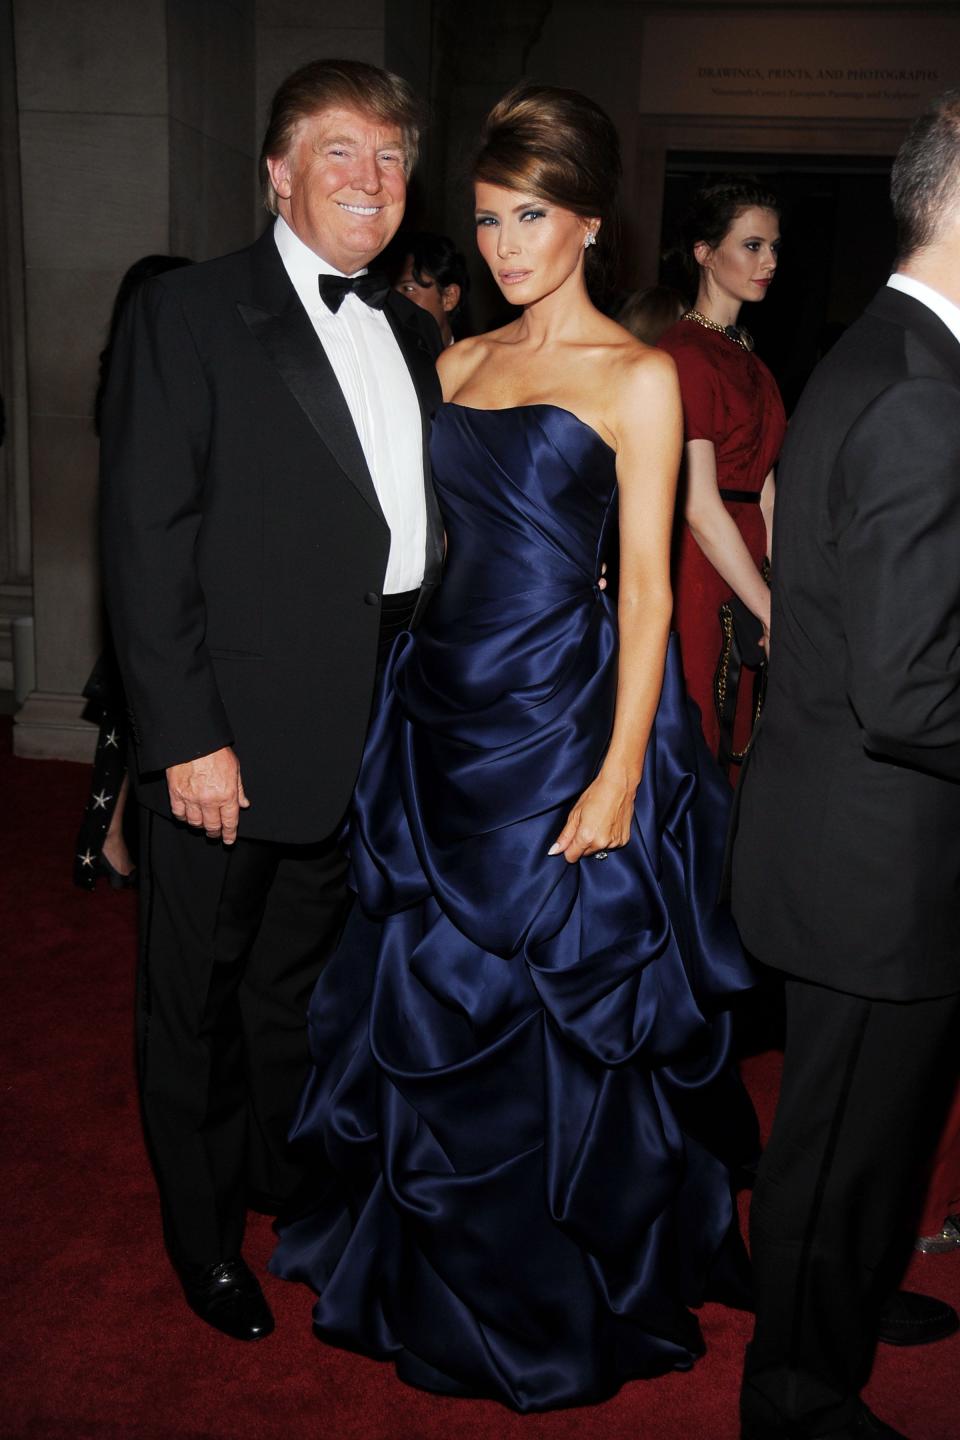 Donald Trump and Melania Trump attend the Met Gala in 2010